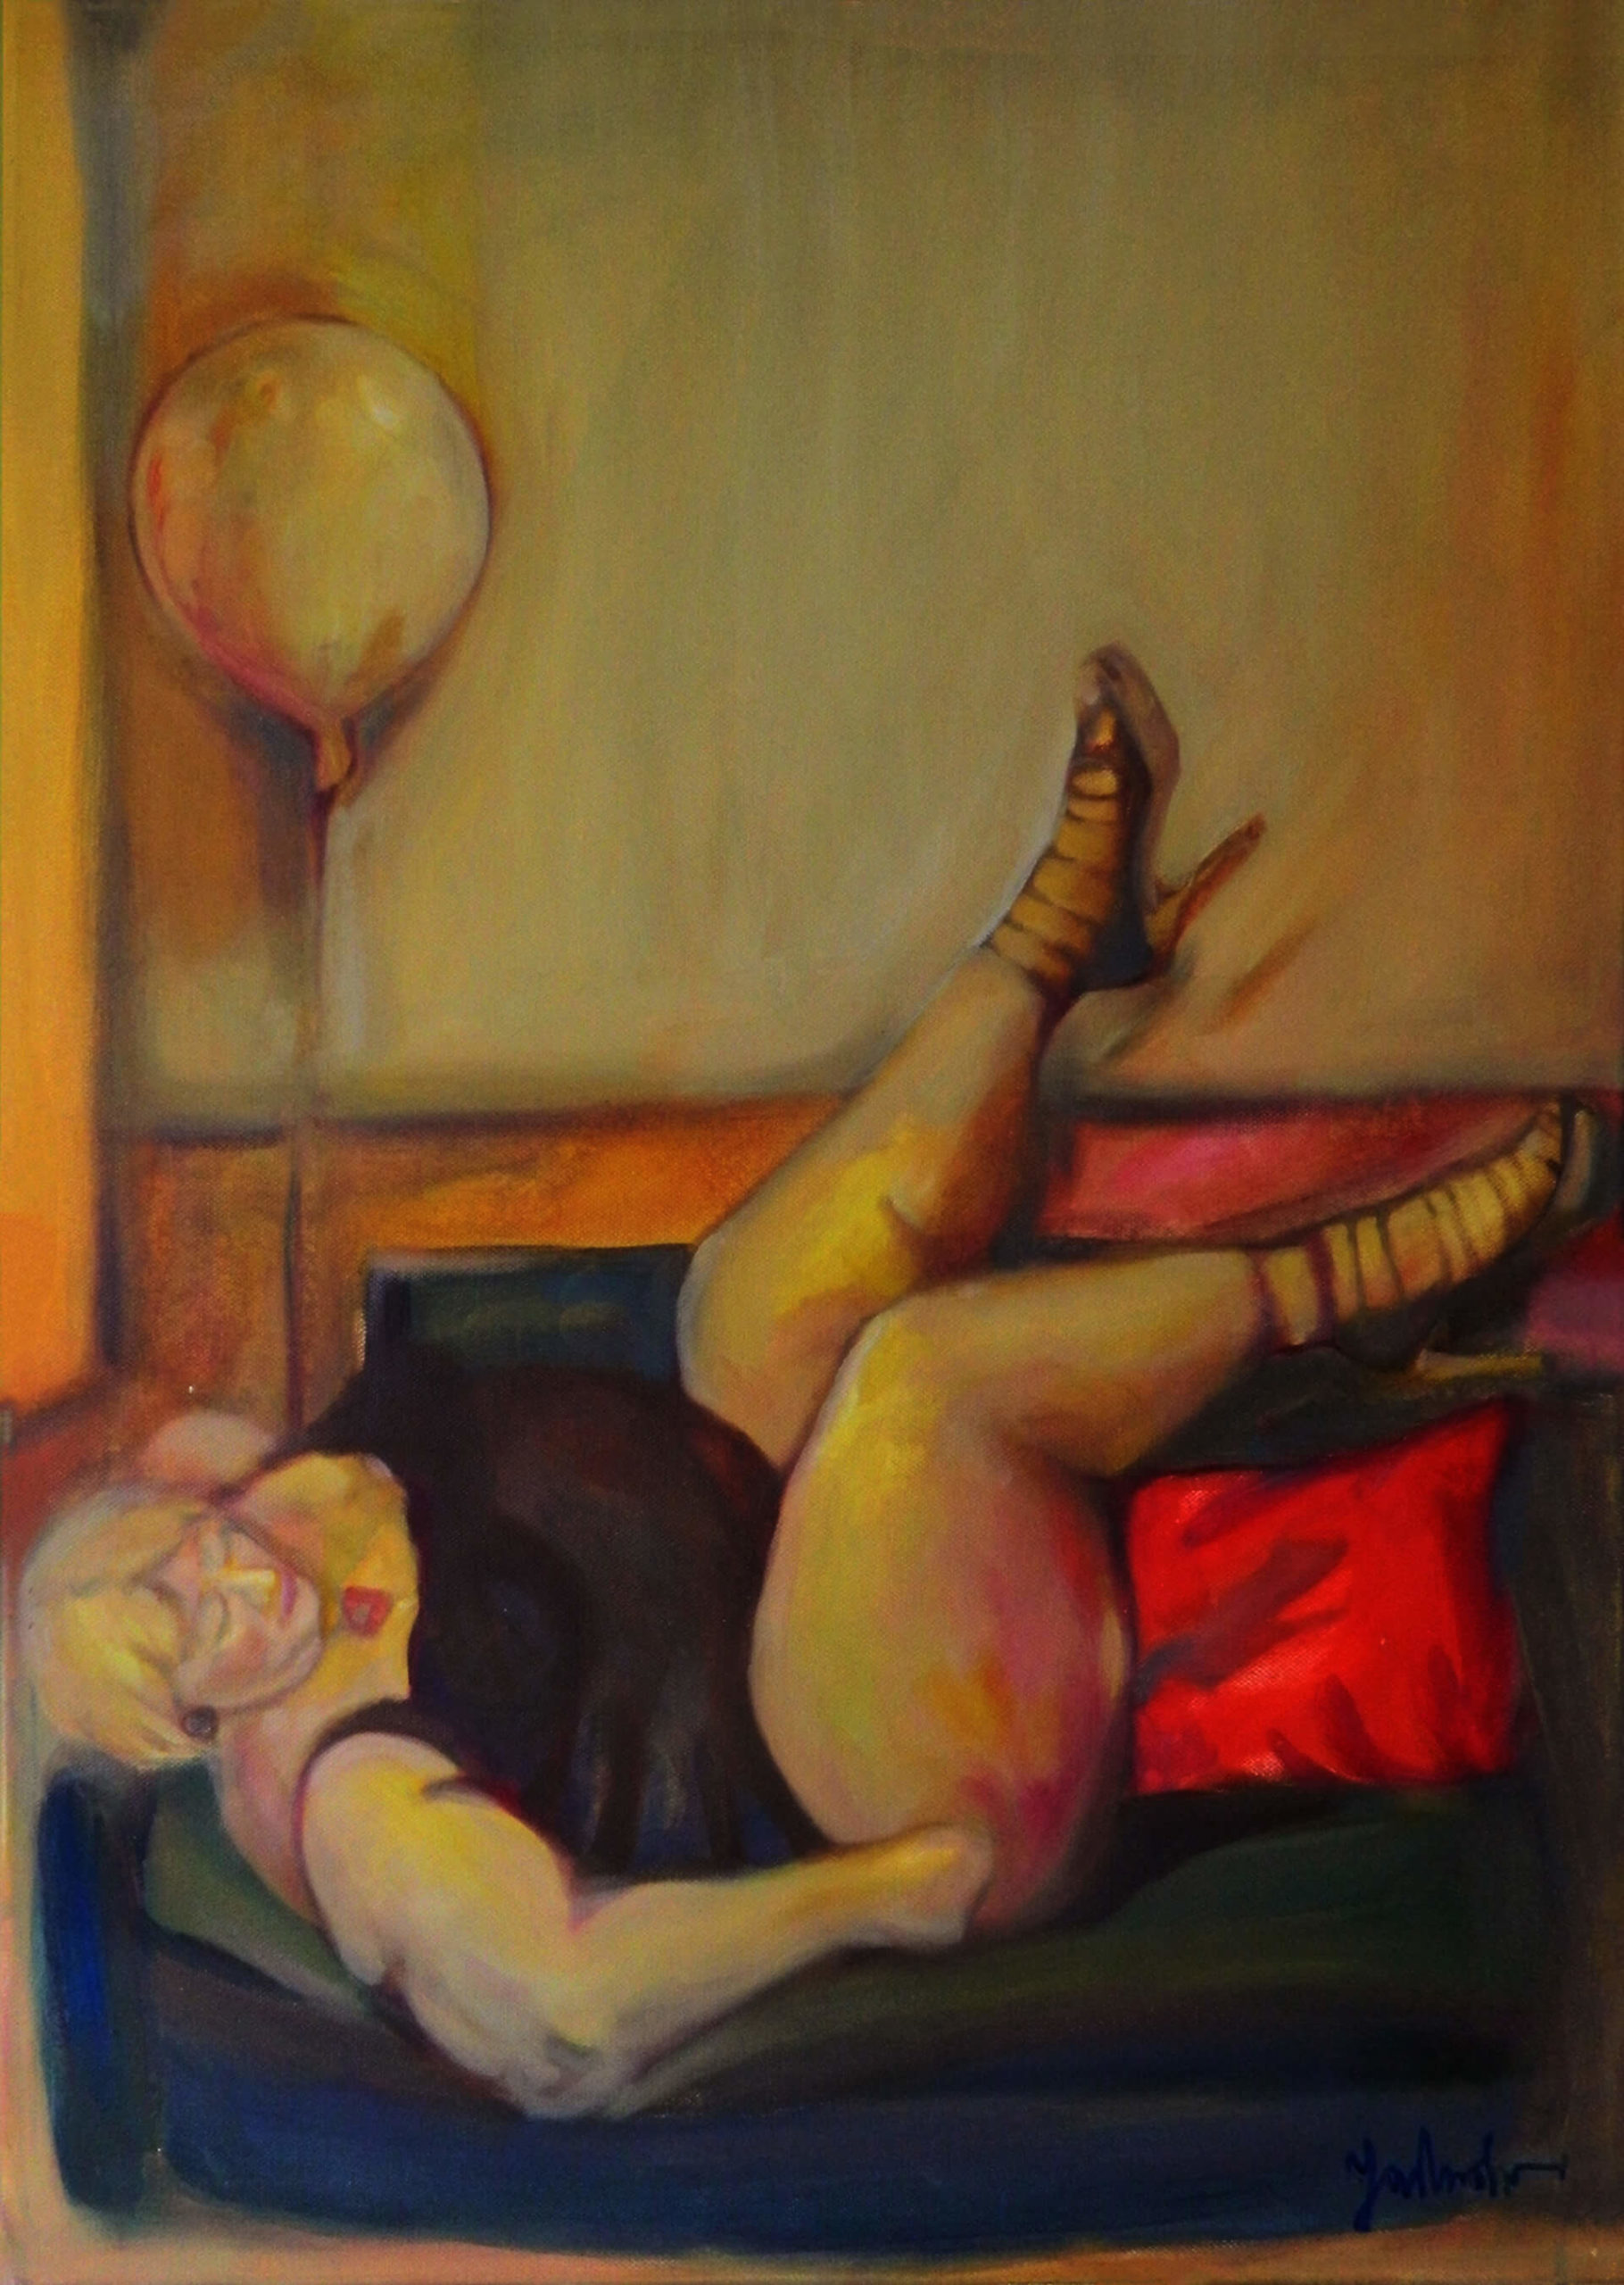 Yellow balloon. 60x80 cm. Oil on canvas. Sold